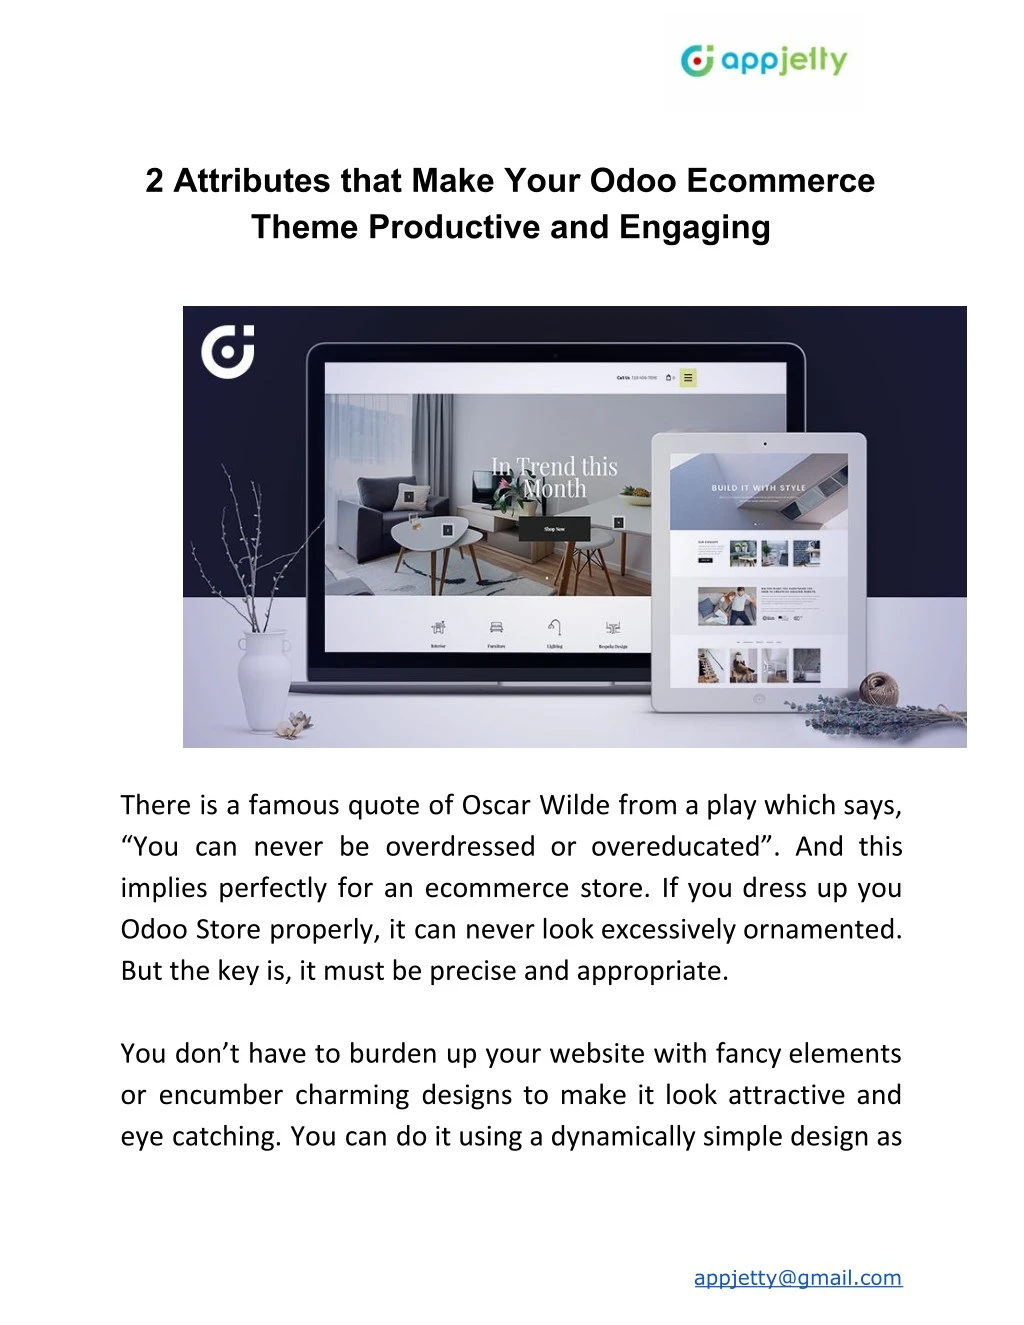 2 attributes that make your odoo ecommerce theme